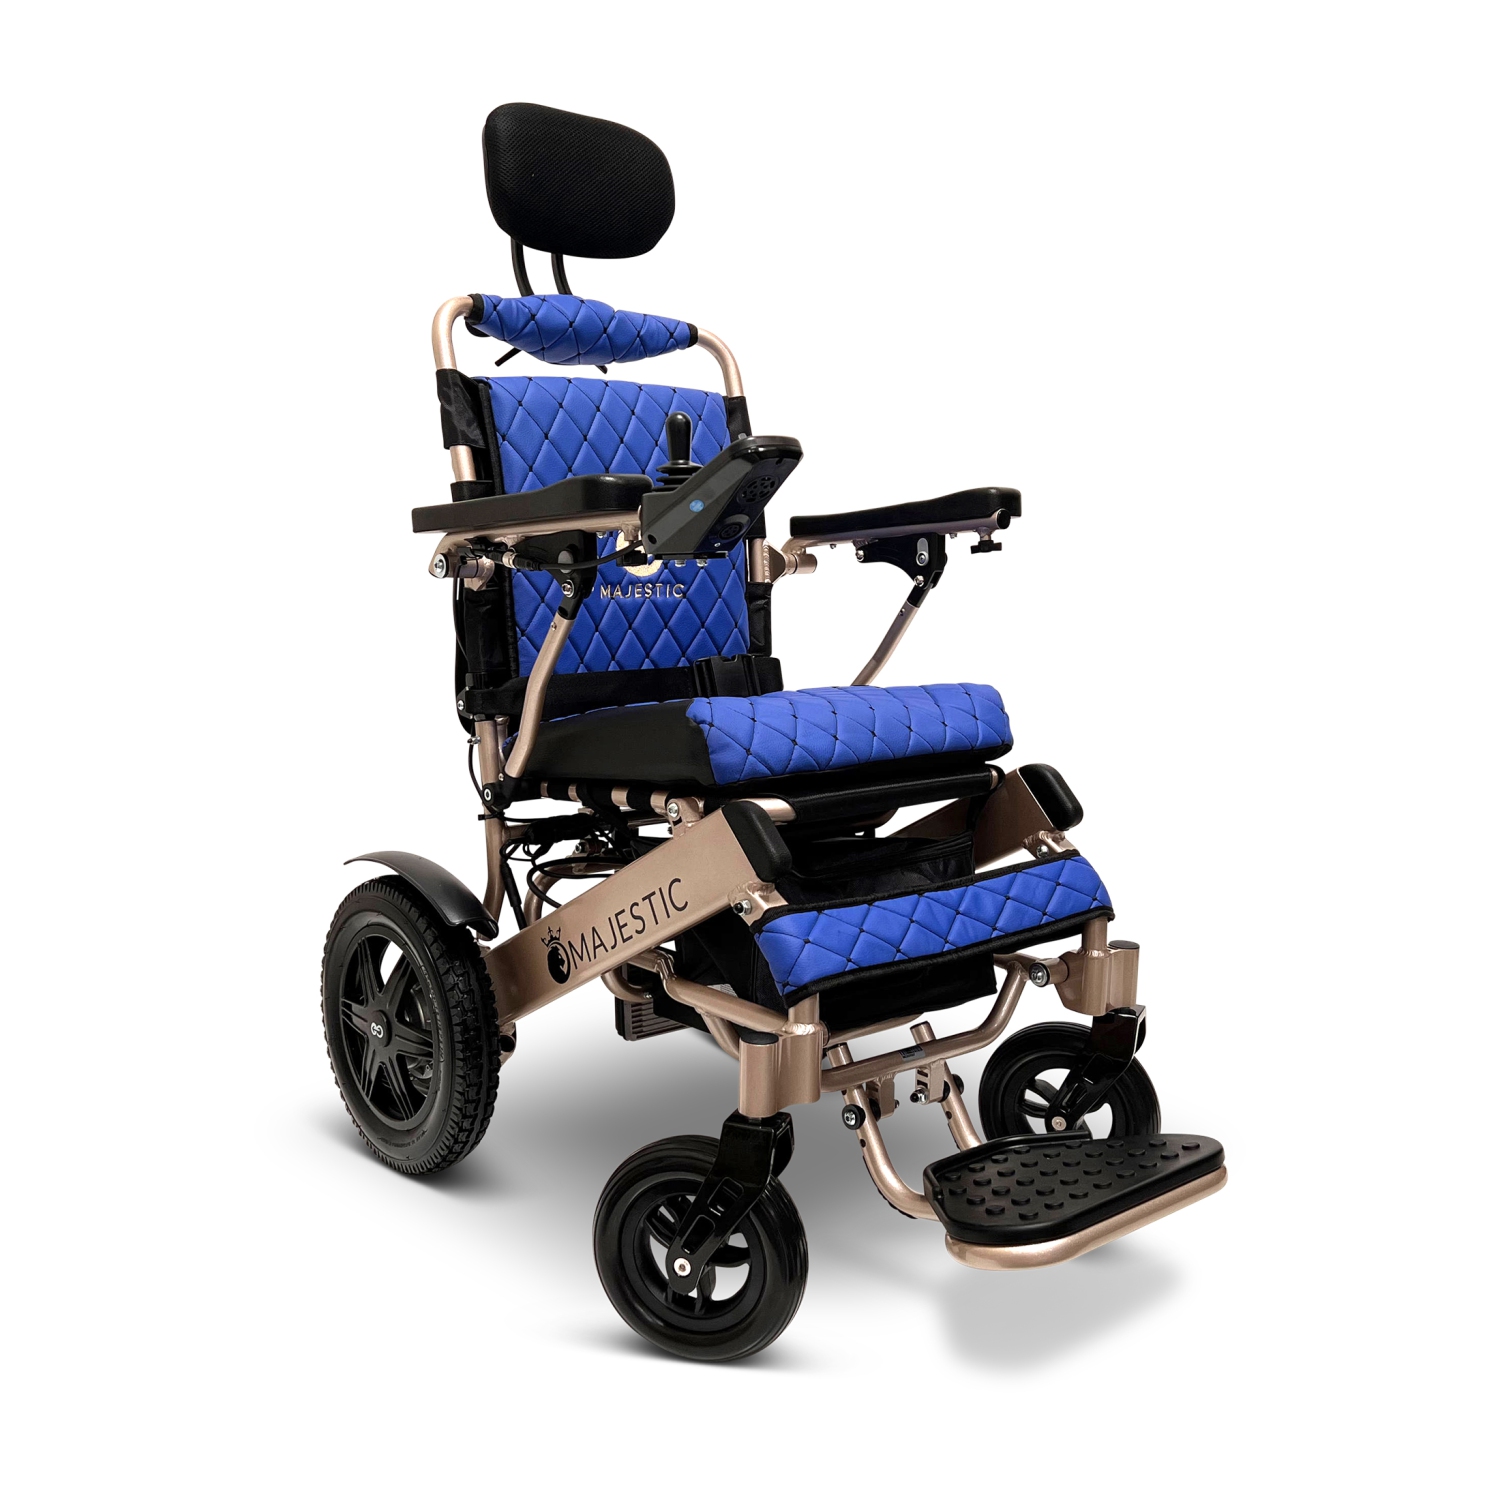 MAJESTIC IQ-9000 Airline Approved Luxury Electric Wheelchair | Auto Recline, LCD Joystick, Foldable, Up to 30 KM Range, Ultra-Light | 17’’ Seat Width, Bronze Frame, Blue Textile